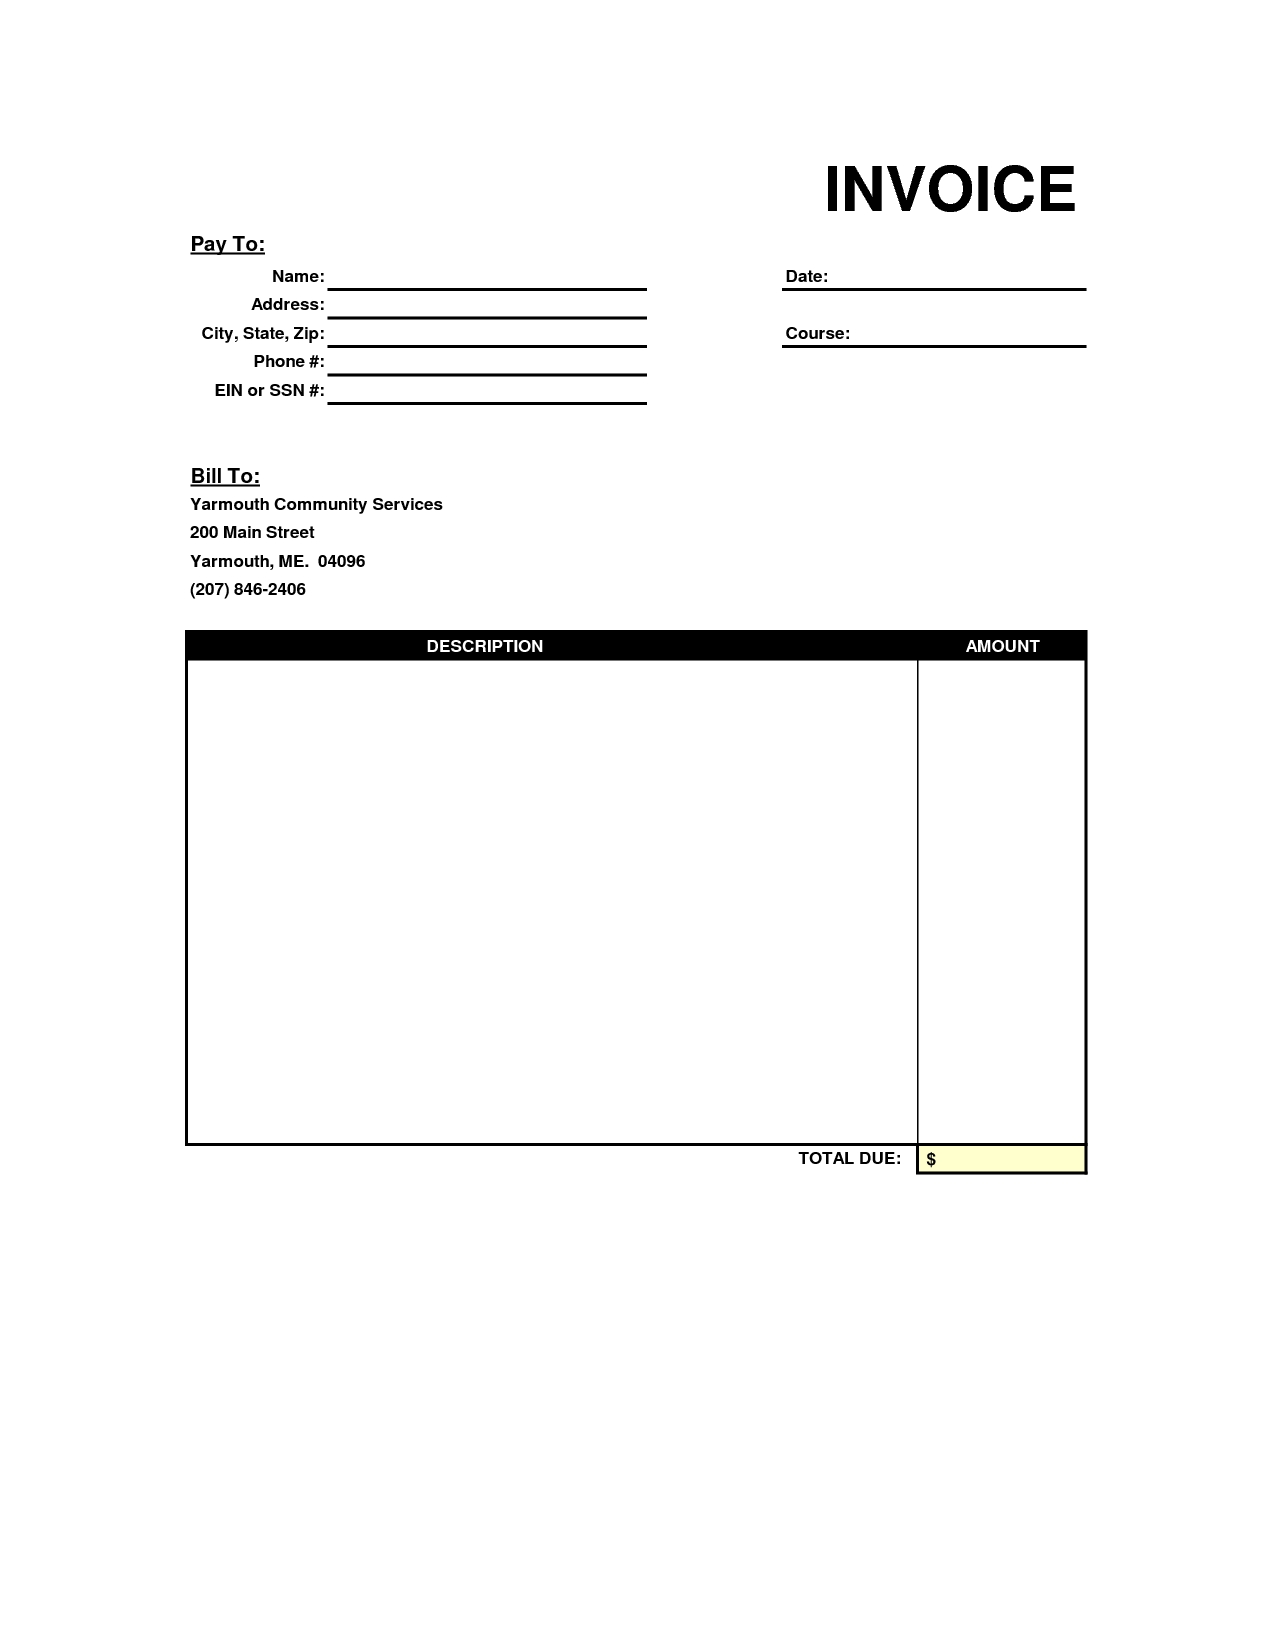 Blank Invoices To Print Invoice Template Ideas 17 Blank Invoice ASKxz